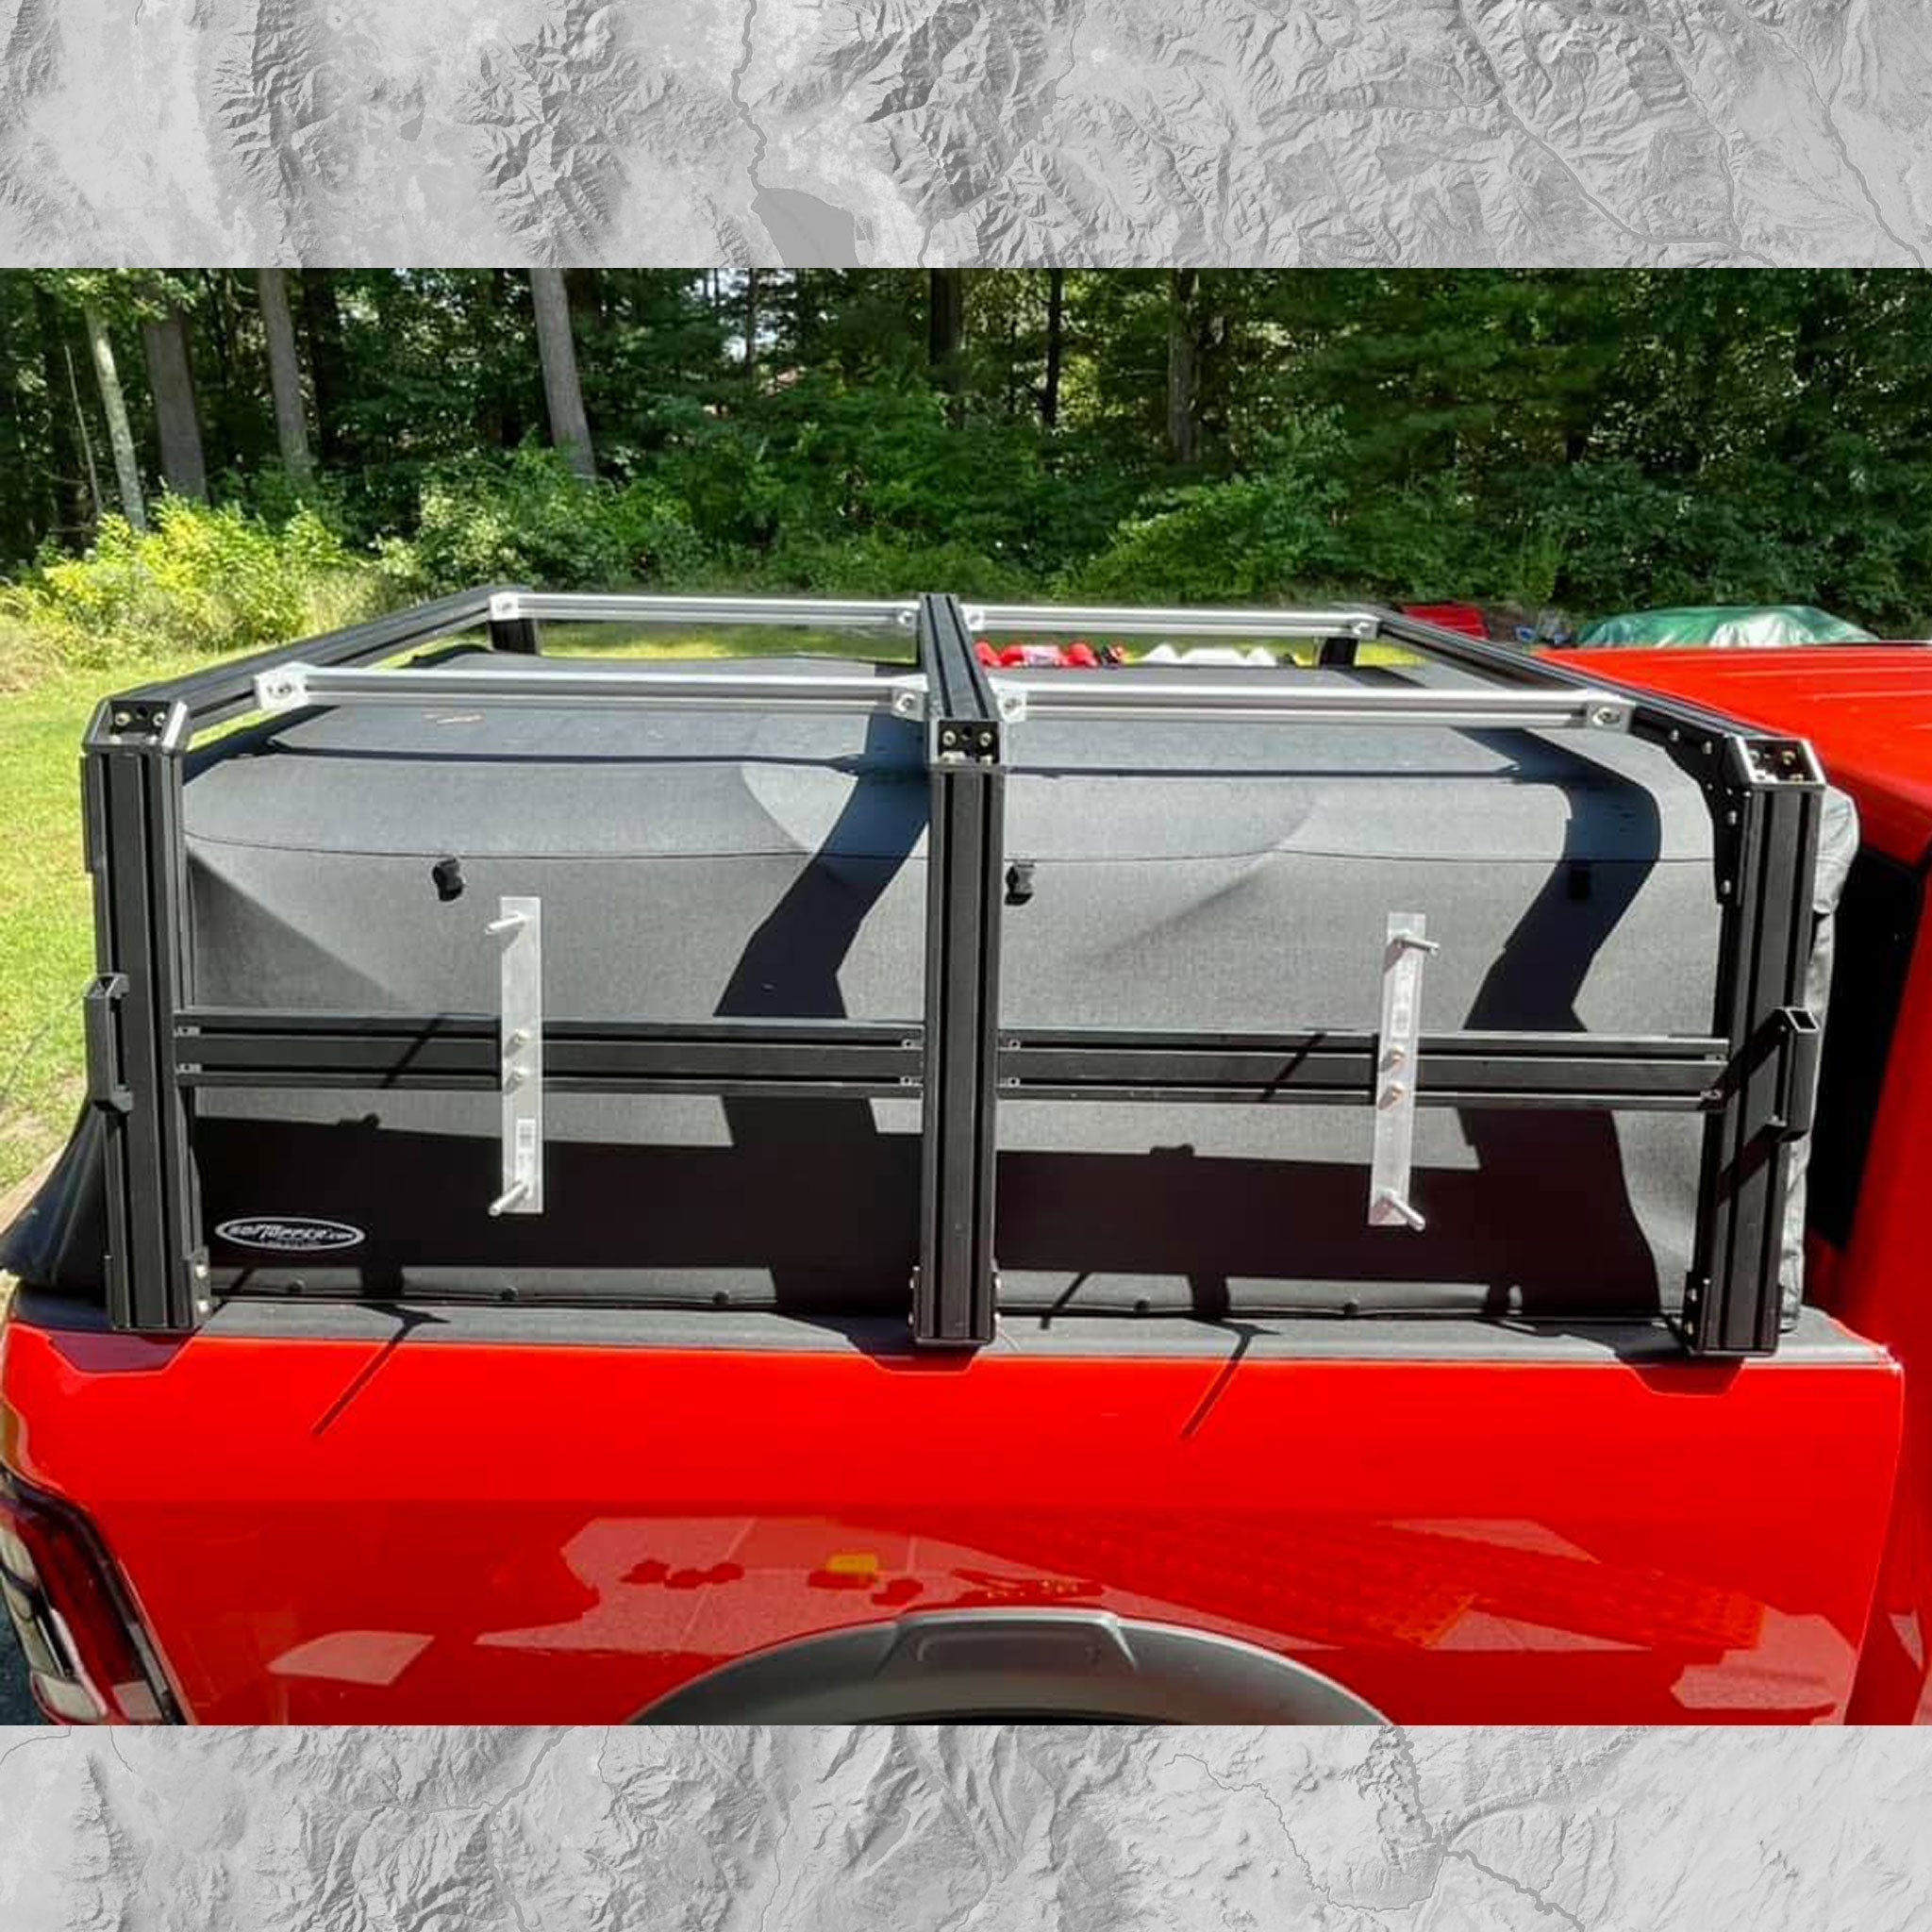 Dodge Ram with soft topper XRT3 bed rack and traction board mounts